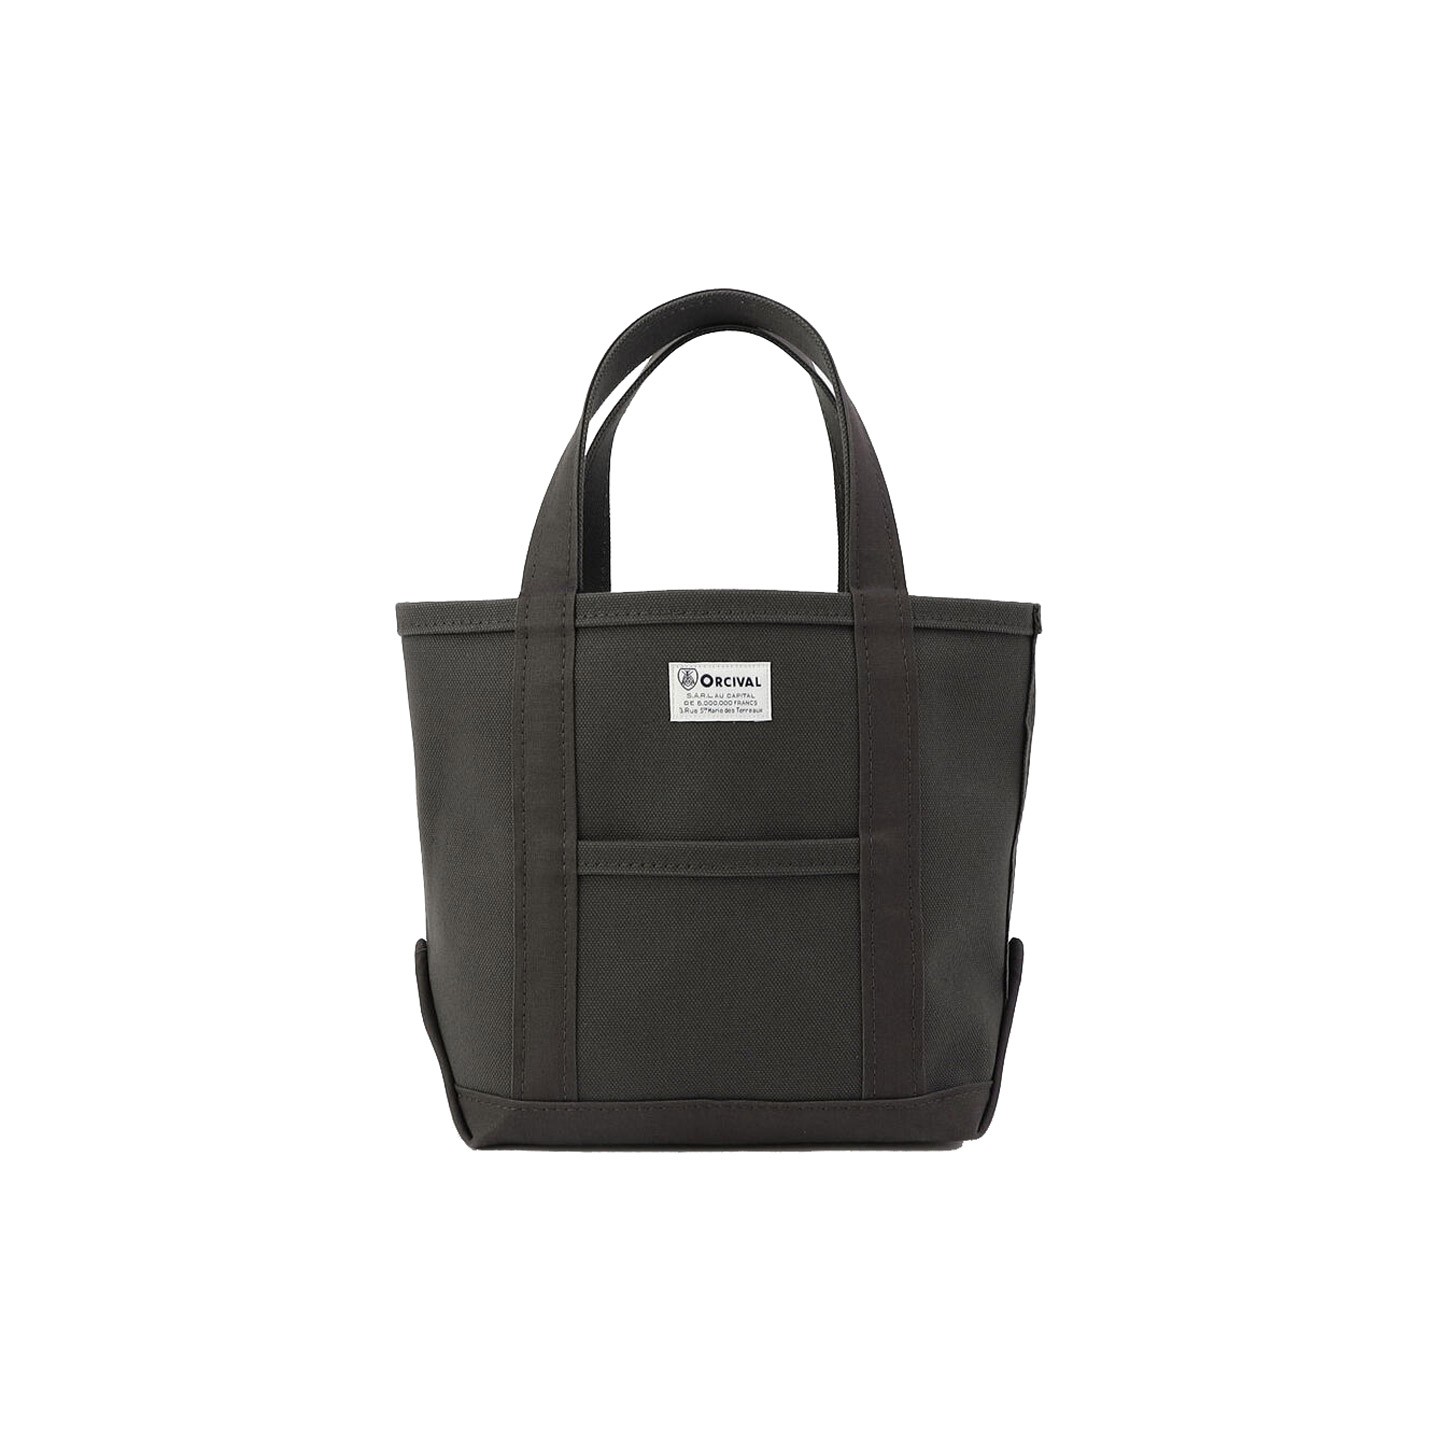 The charcoal tote-bag by Orcival in small size